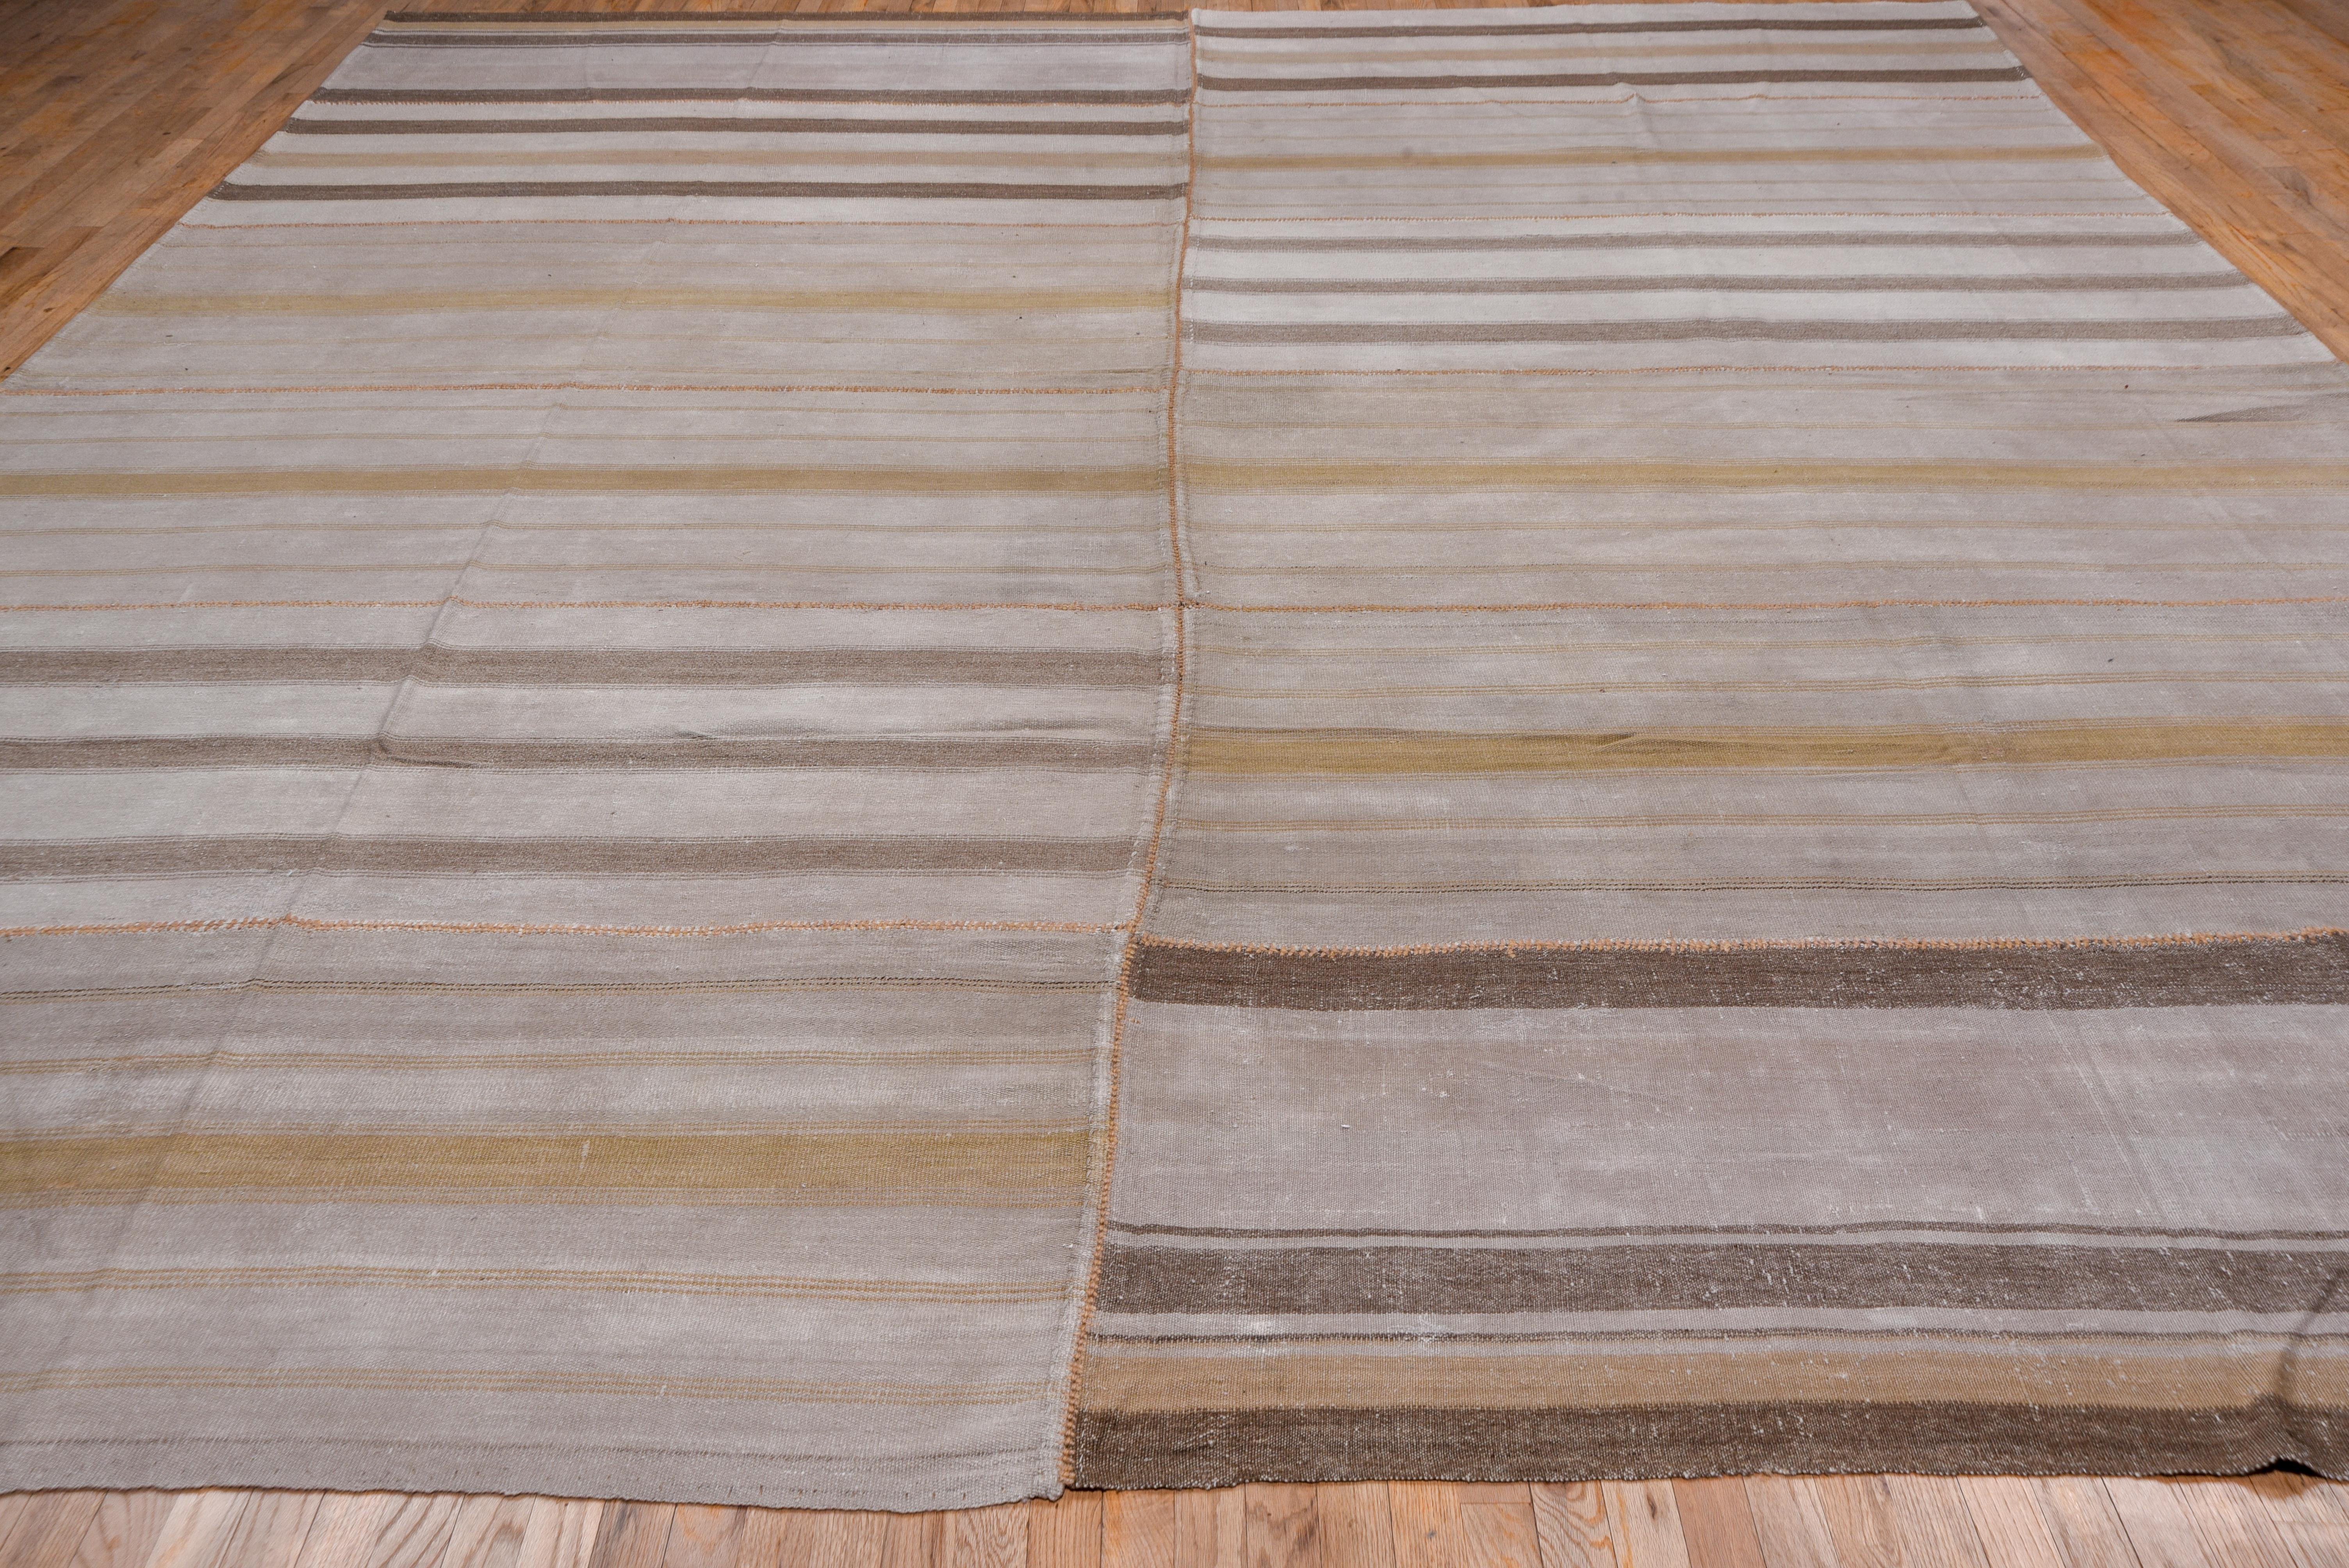 This all wool rustic piece has been created from two edge joined assembled wool panels with jogged stripe designs in shades of brown, beige, straw and taupe. The composite sections were originally parts of long strips, but there is no match that